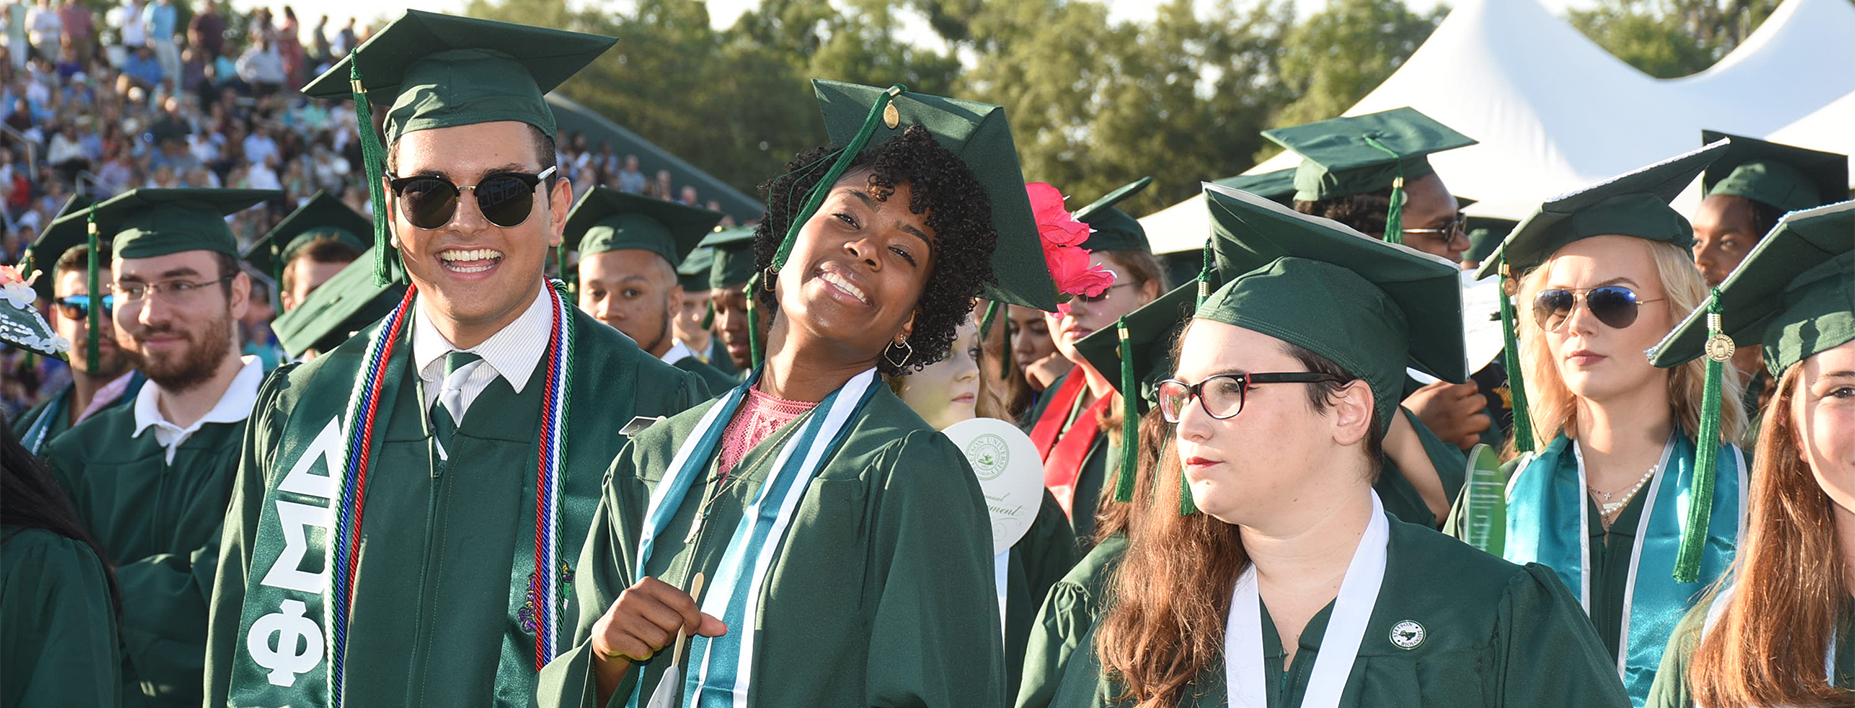 Graduates are all smiles at 2019 Commencement